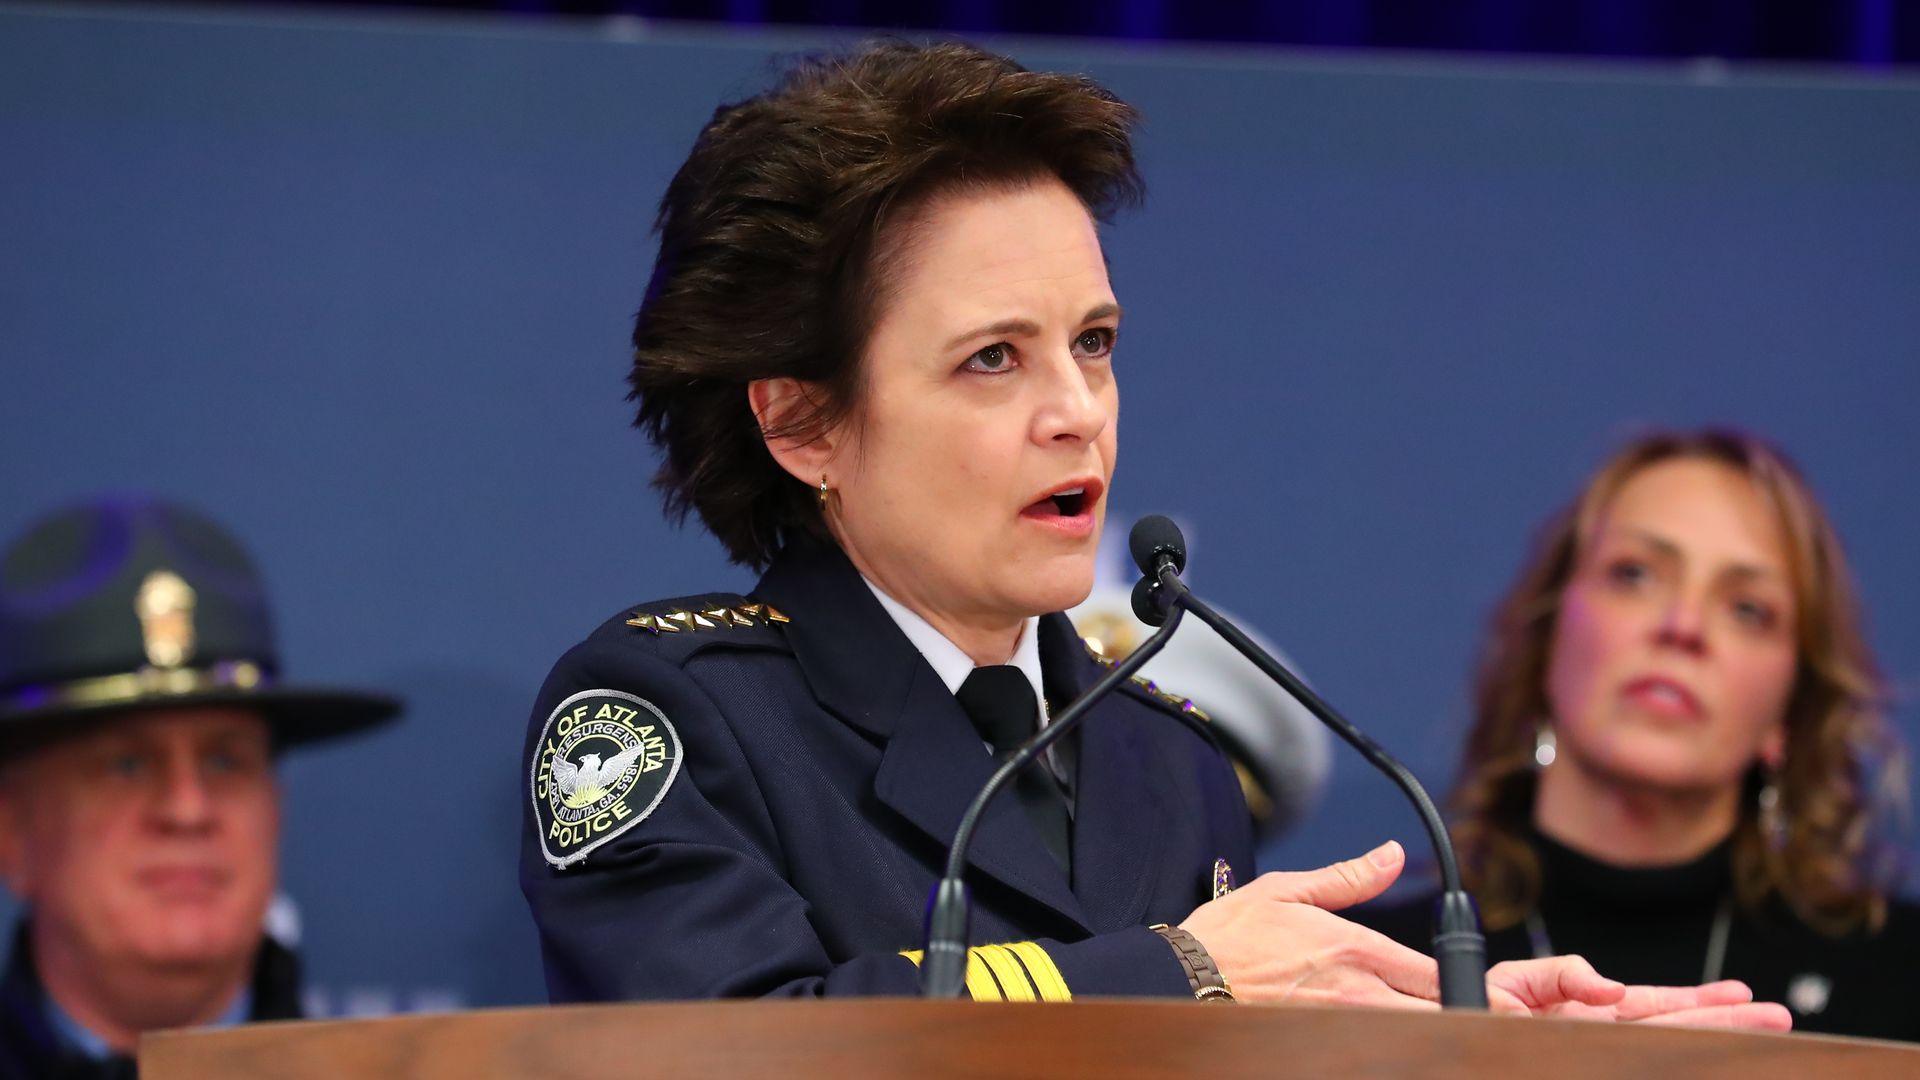 In this image, the Atlanta police chief speaks into a microphone from behind a podium.